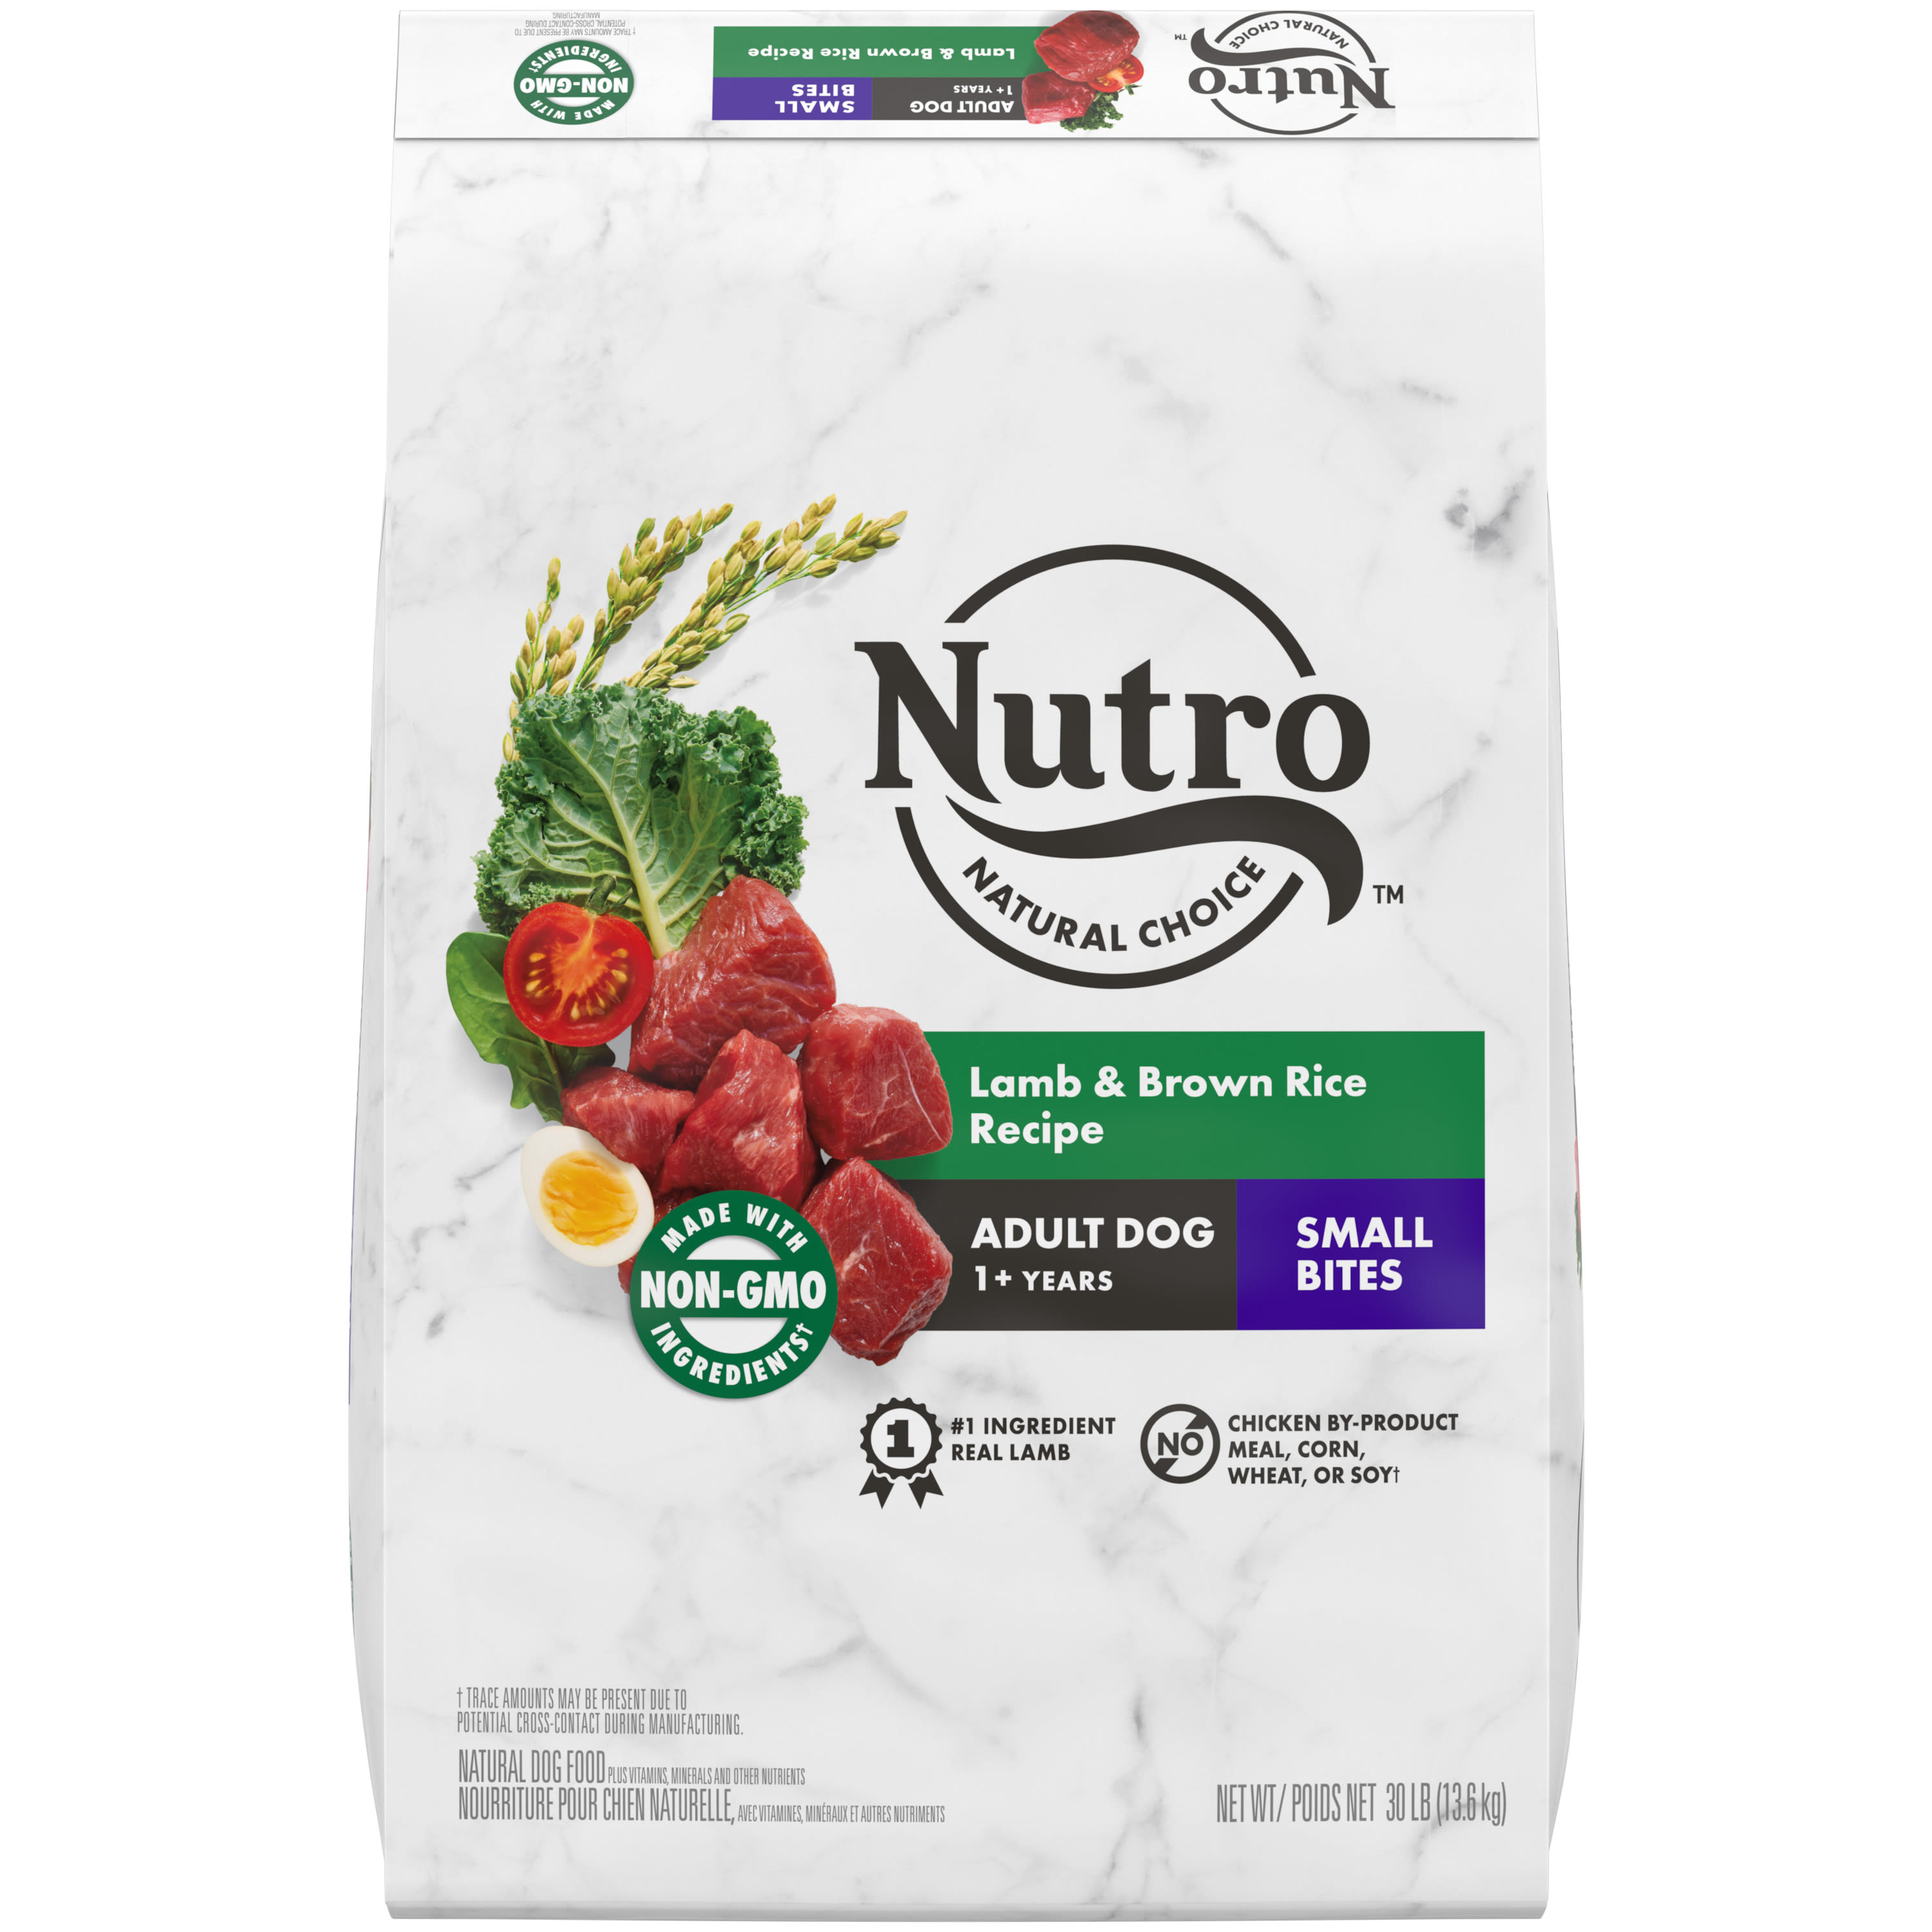 Nutro Natural Choice Small Bites Lamb & Brown Rice Dry Dog Food for Adult Dogs, 30 lb. Bag - image 3 of 13